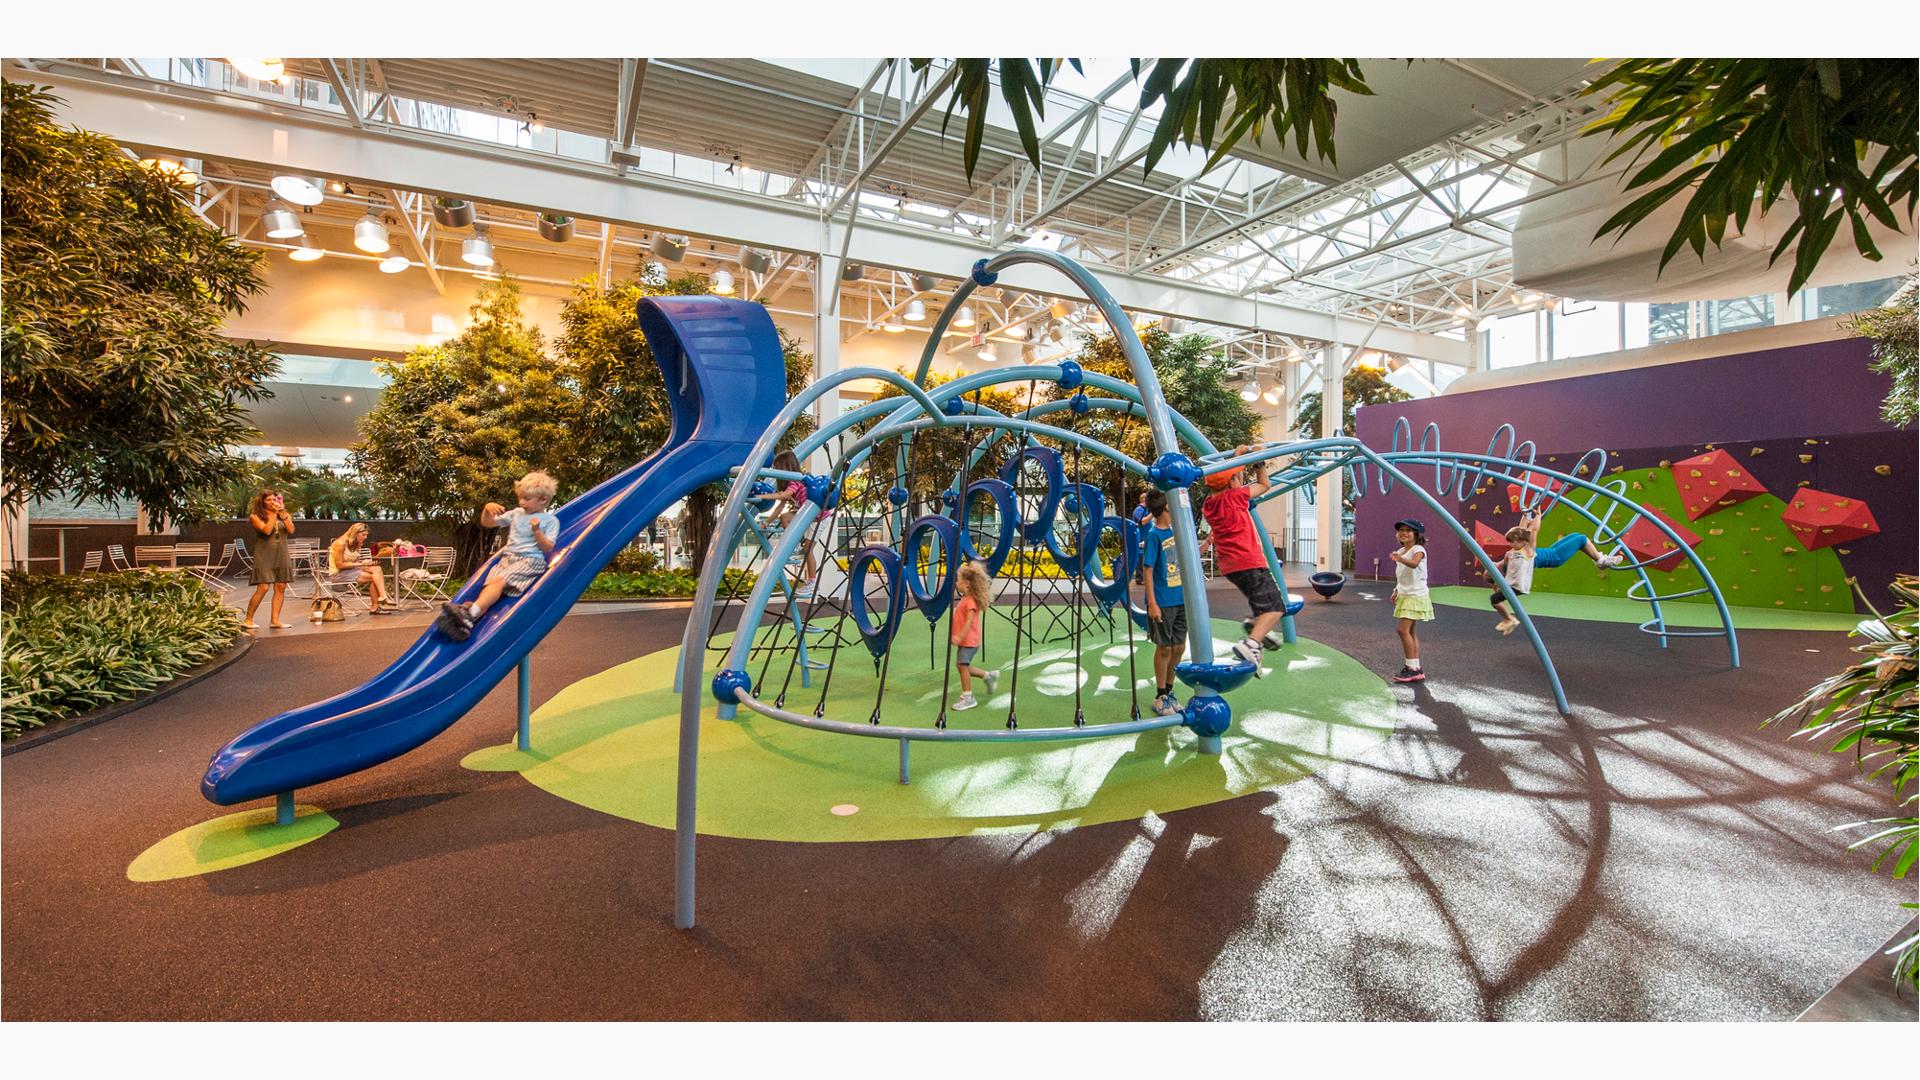 Inside a shopping center in Calgary, moms near some outdoor furniture take photos of their kids playing on this Evos play structure. The structure is surrounded by trees and long grass brush. A rock wall sits in the the background.